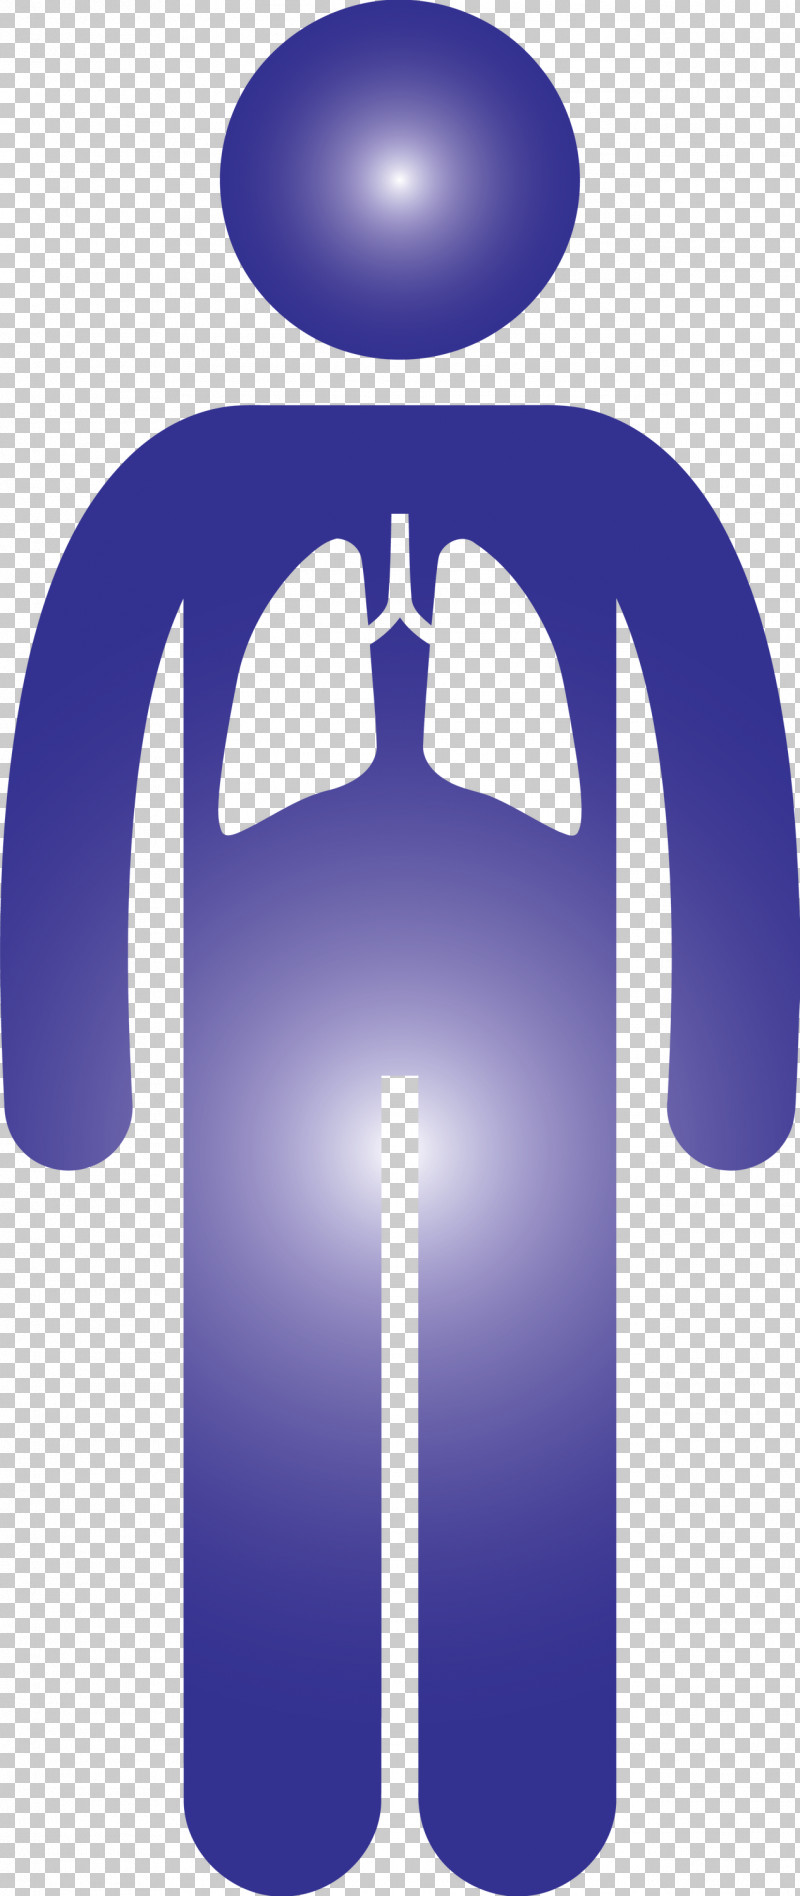 Lungs People Corona Virus Disease PNG, Clipart, Arch, Clothing, Corona Virus Disease, Electric Blue, Jersey Free PNG Download